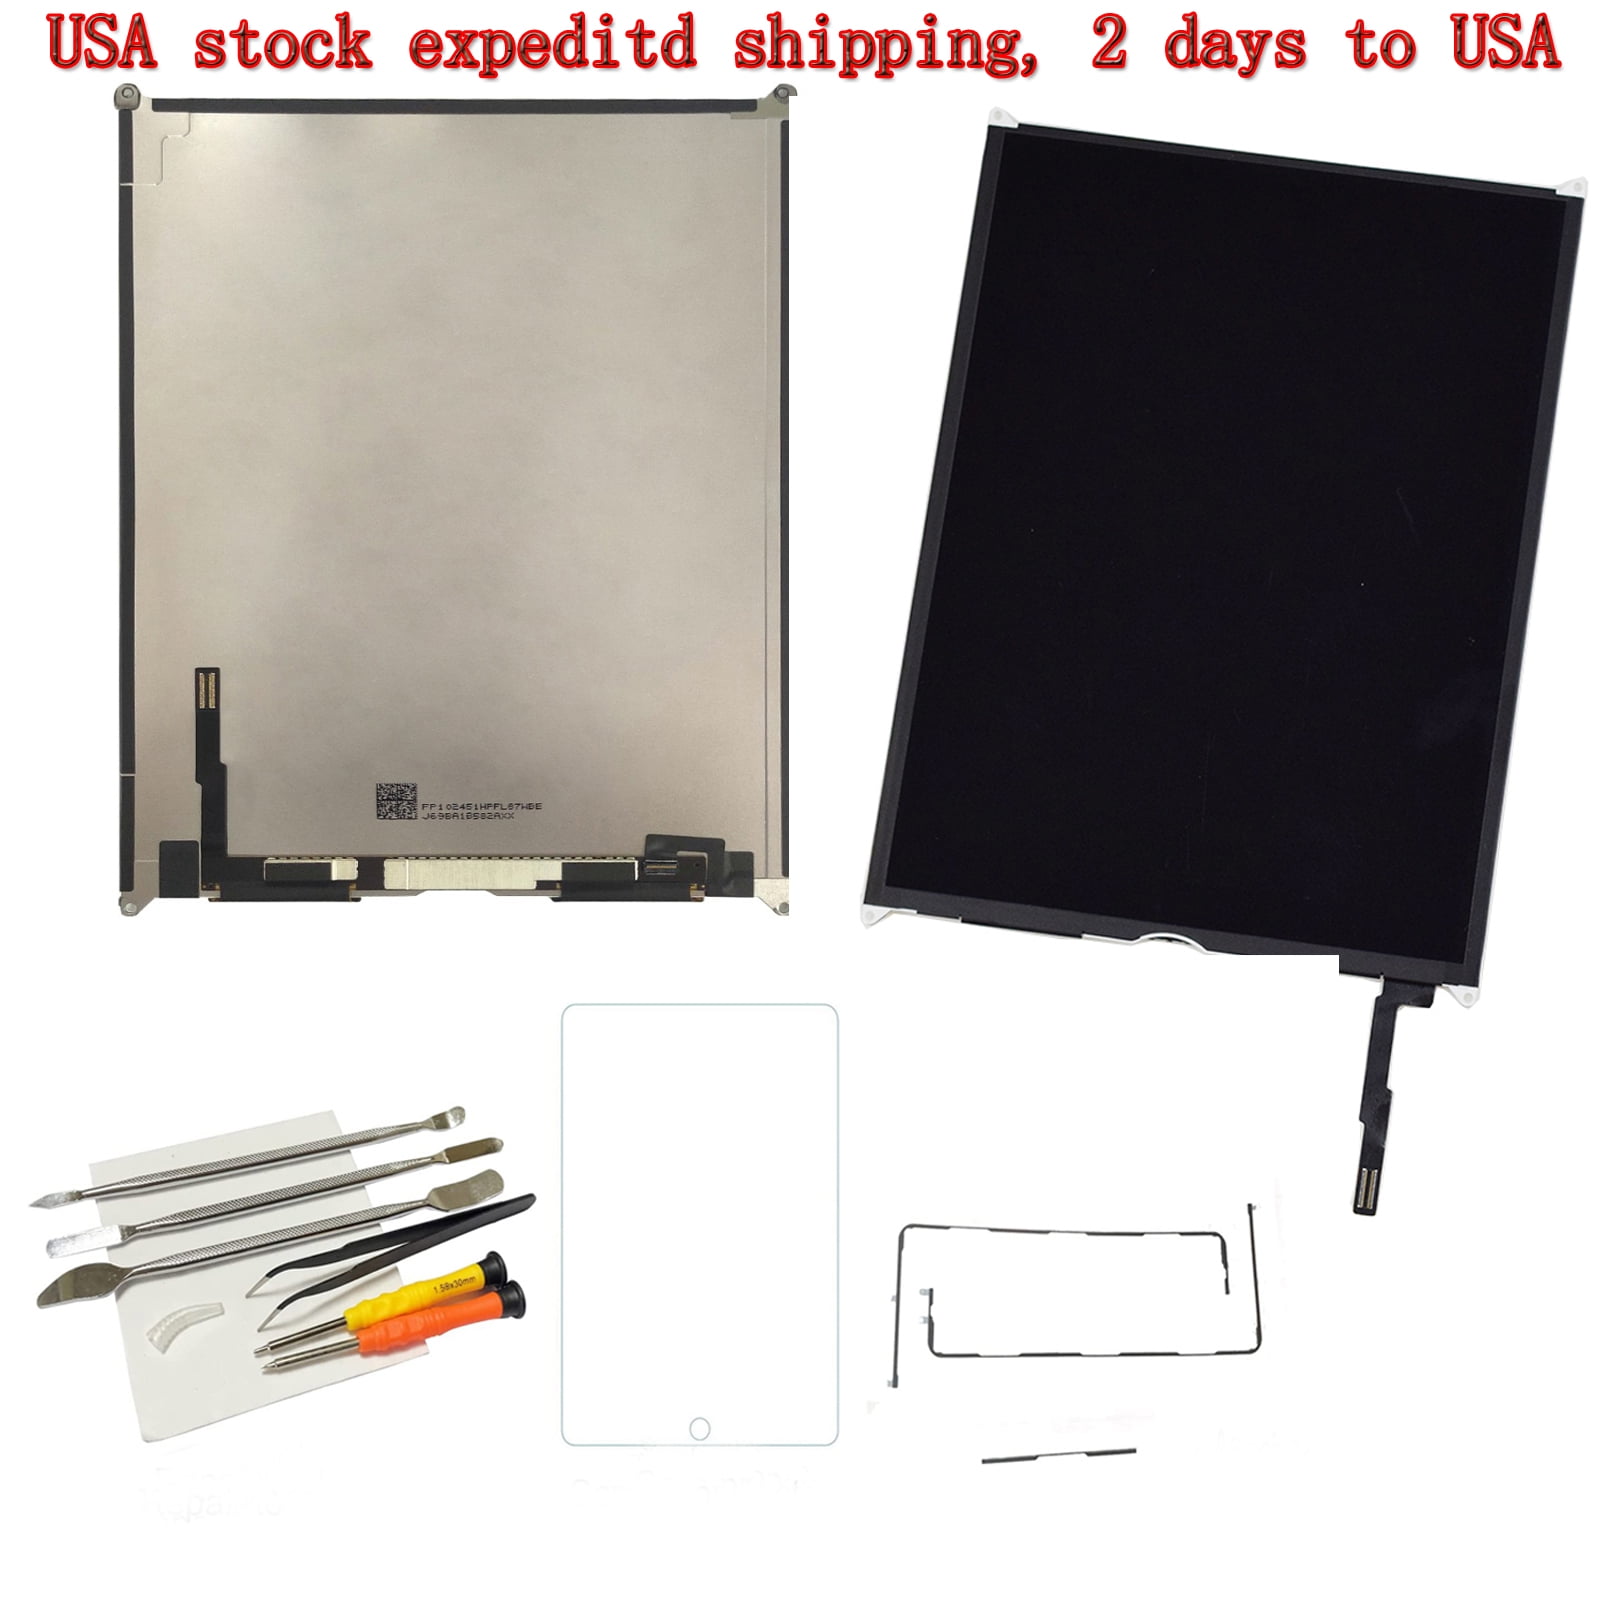 ycheda LCD Screen Panel Display replacement for iPad 7 8 9 7th 8th 9th 10.2  inch 2020 A2197 A2198 A2200 A2428 A2429 A2270 A2430 A2602 A2603 A2604 A2605  